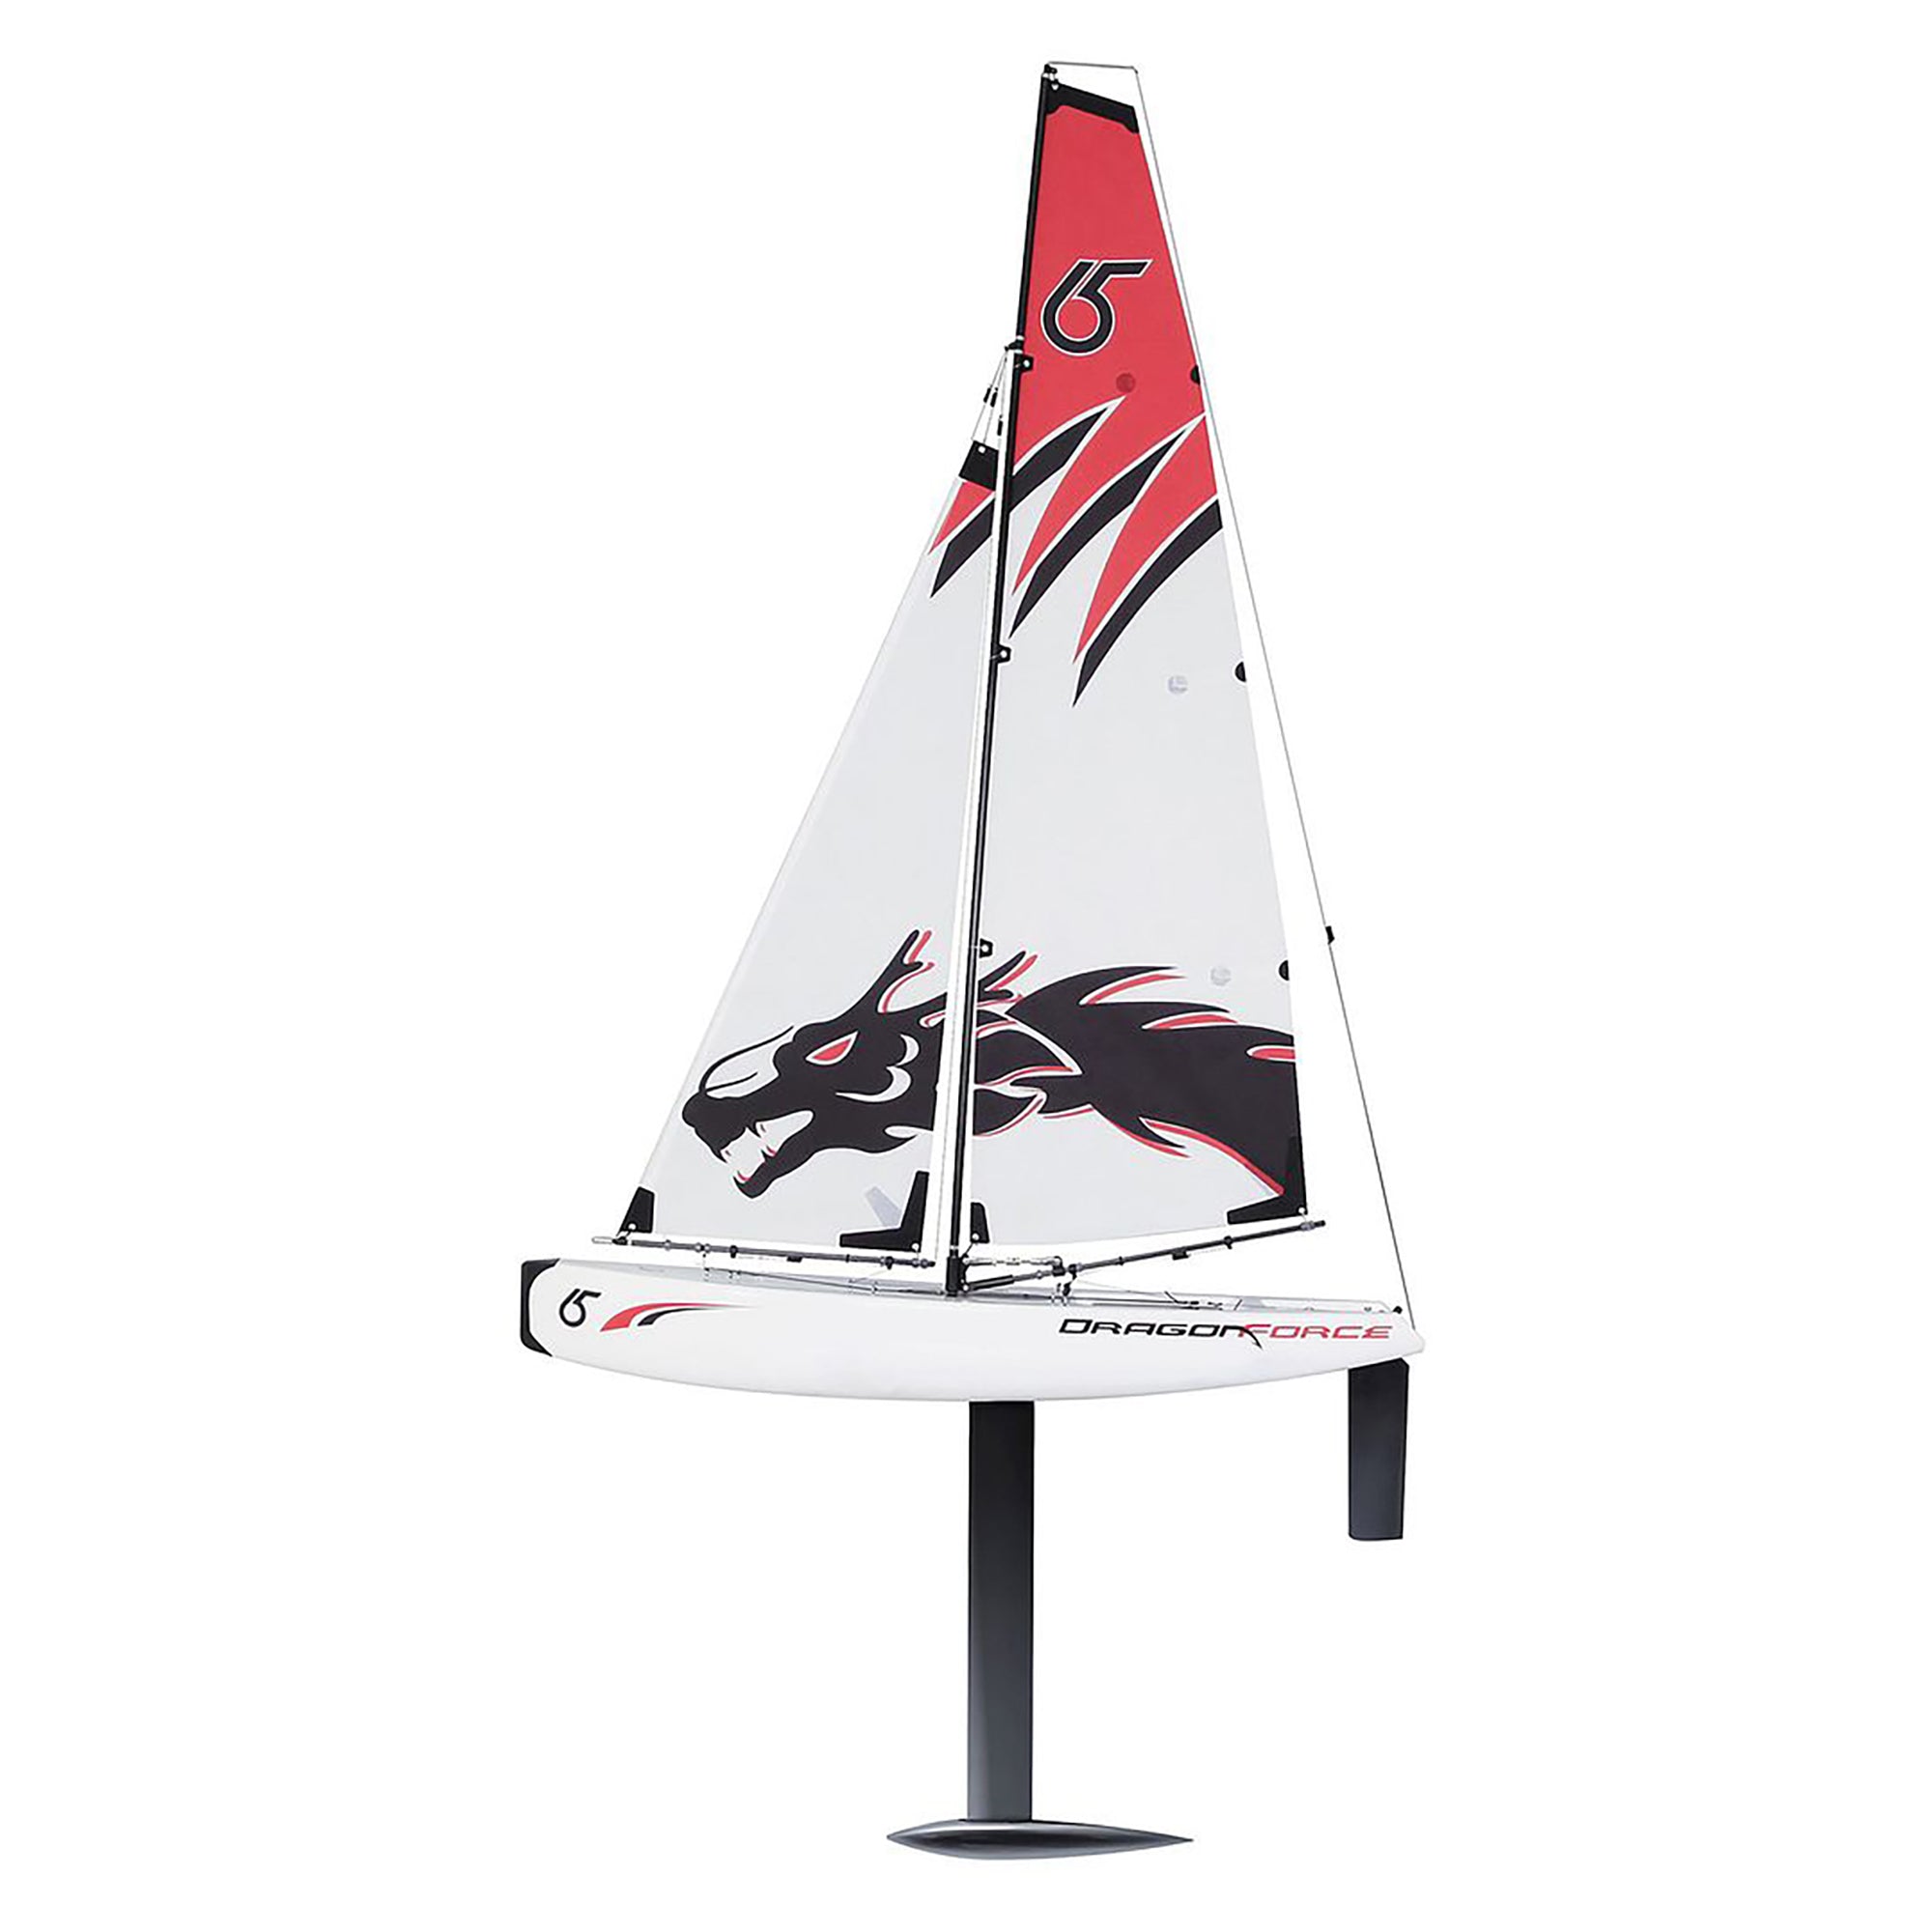 Joysway DragonForce 65 V5 2.4GHz RTR DF65 RG65 Class RC Yacht - White Edition (includes Transmitter & Receiver), Multicolour